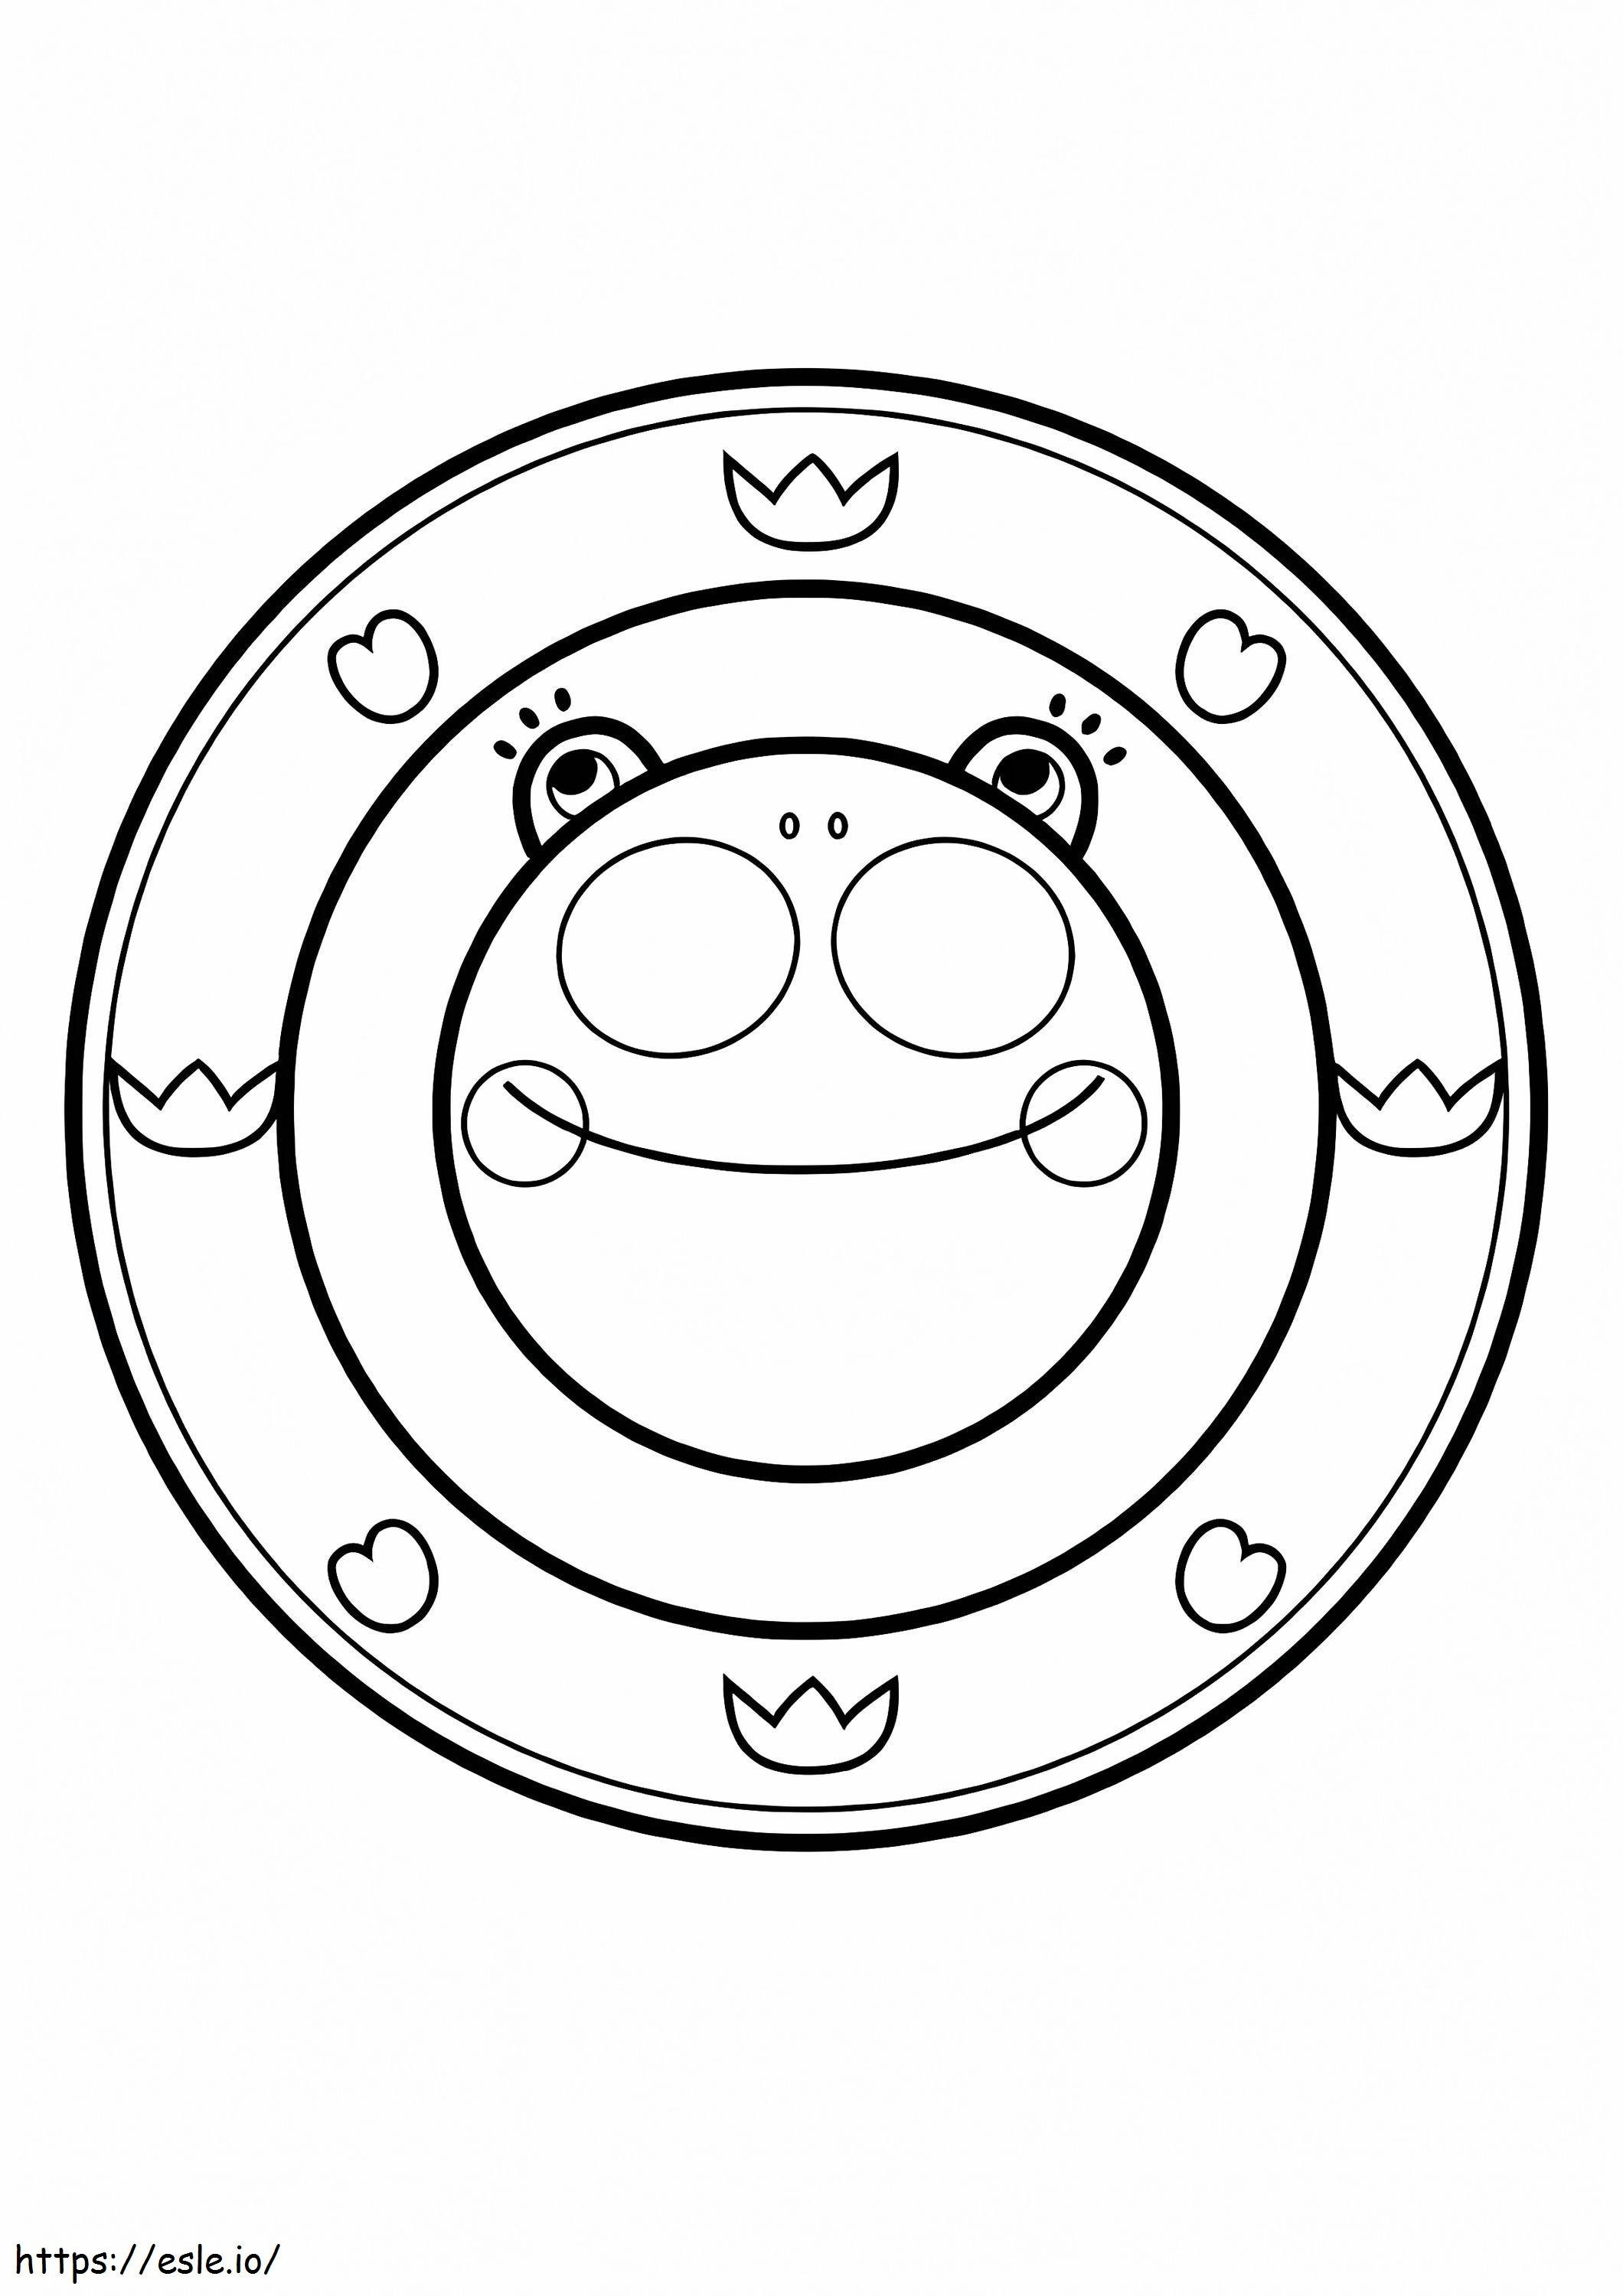 Frog Mandala For Little Ones coloring page